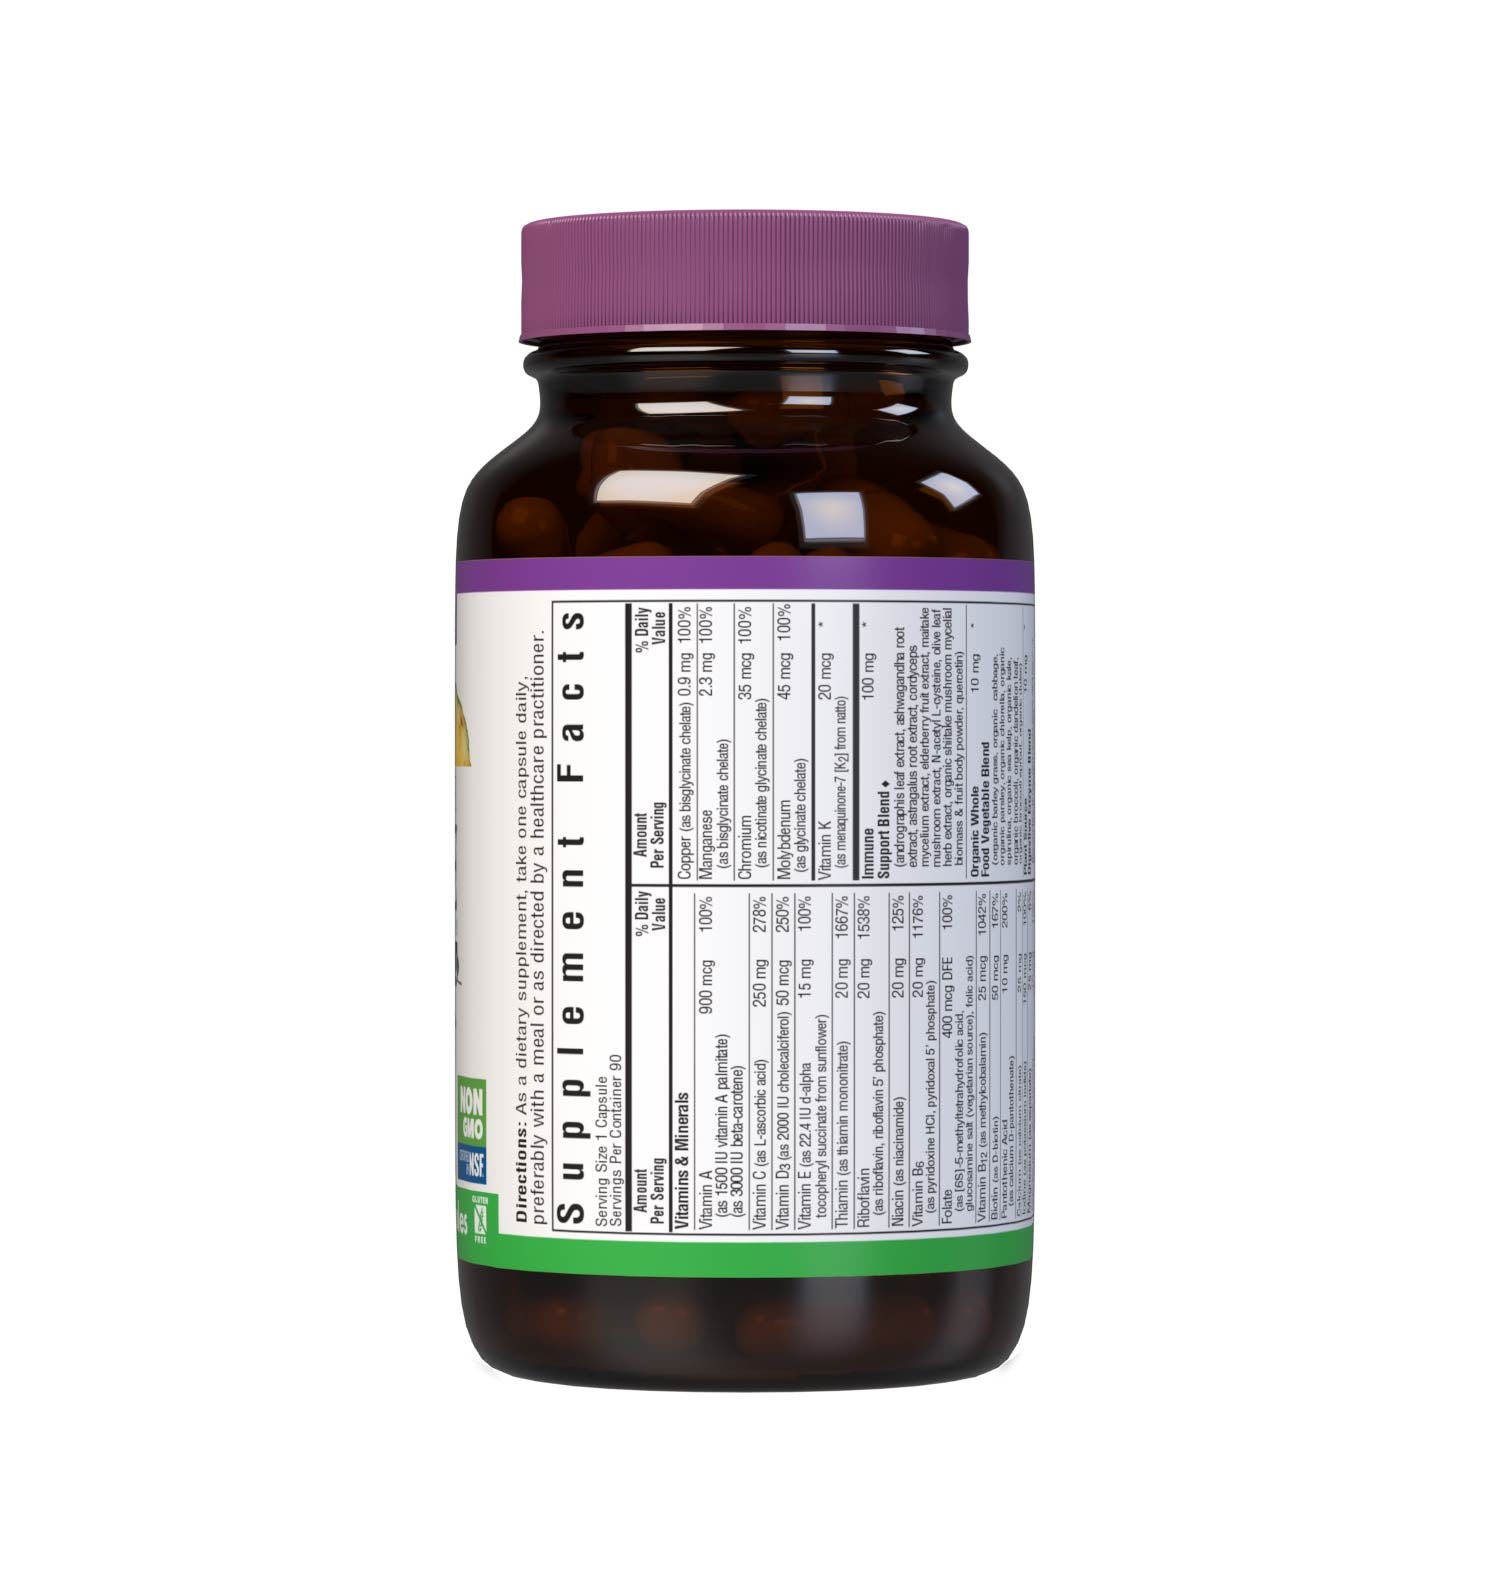 Bluebonnet Nutrition's Immune One 90 vegetable capsules delivers targeted nutrients for respiratory support, sinus comfort, immune defense and antioxidant protection including: Vitamin E derived from Non-GMO sunflower oil Active coenzyme forms of B vitamins. Supplement facts panel. #size_90 count